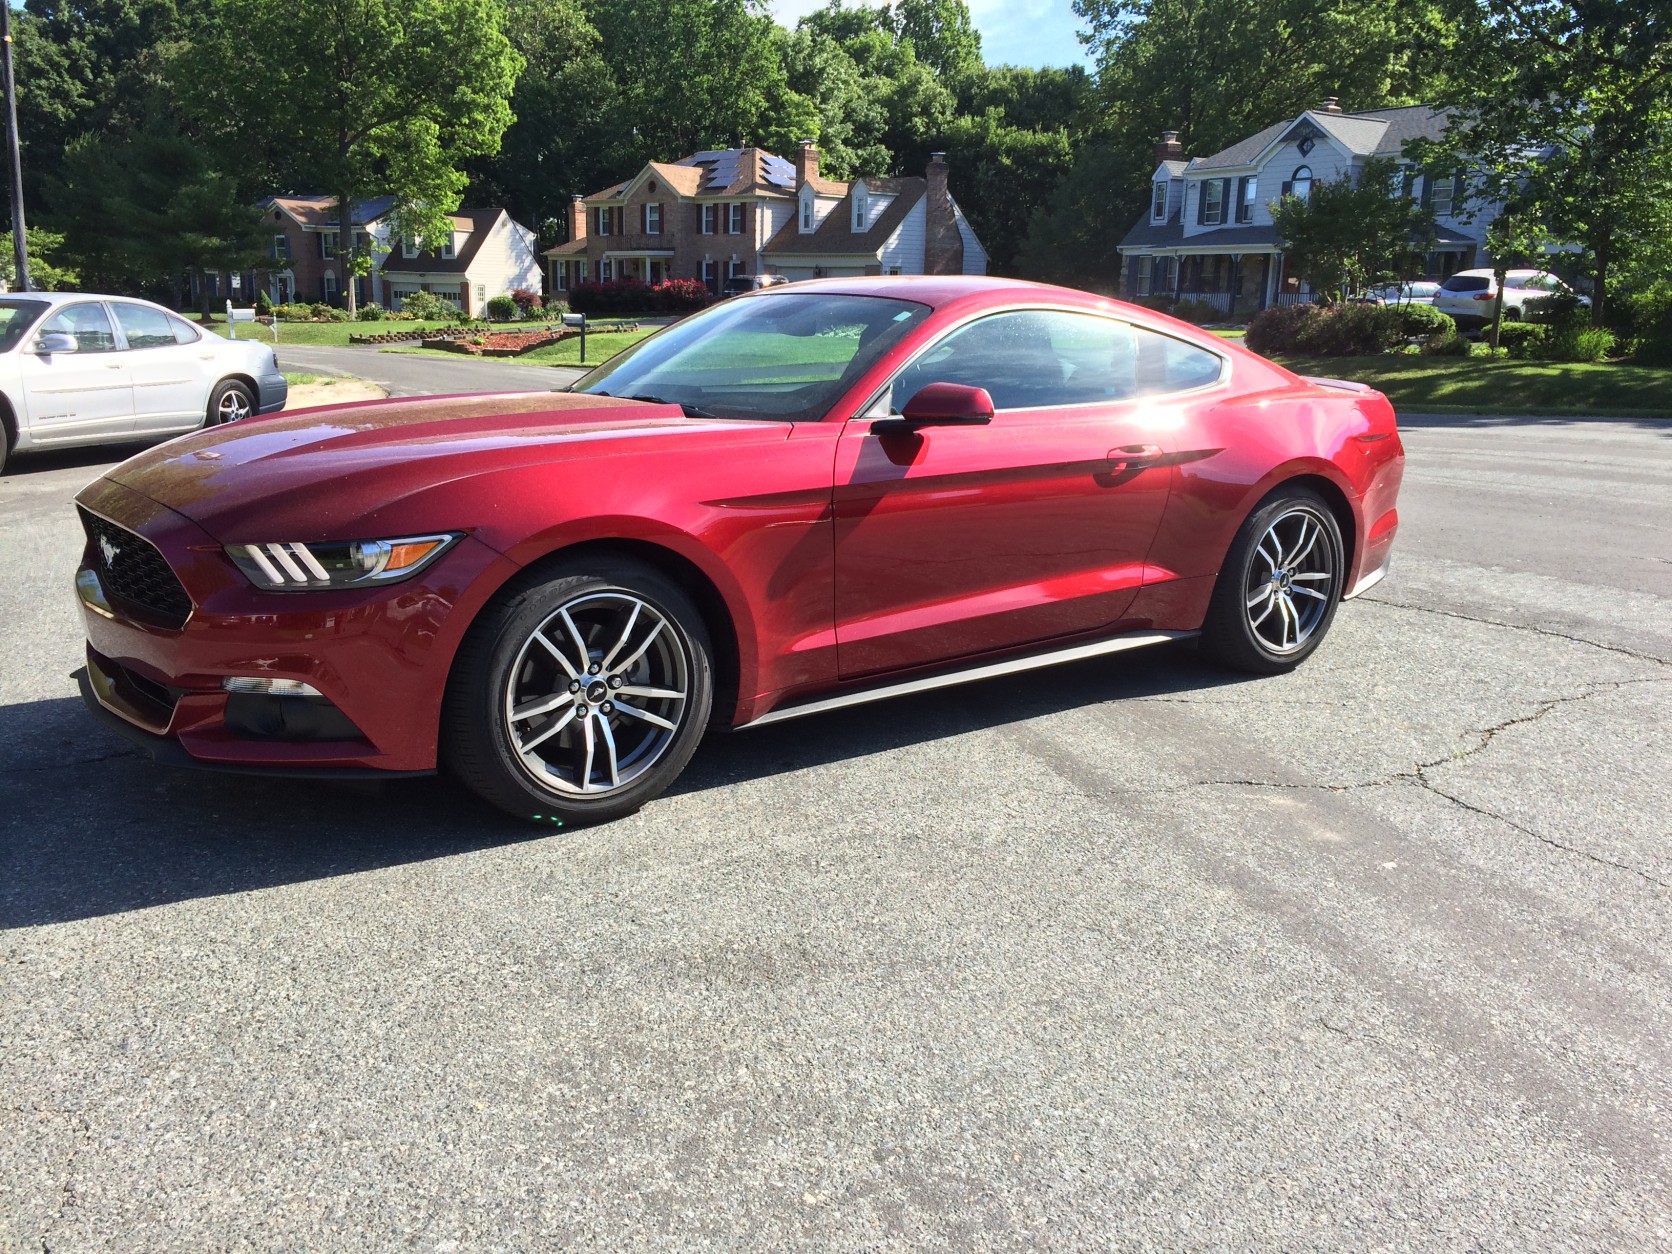 The Mustang is no longer just a muscle car but more a well rounded sports car with good handling and a more refined interior. (WTOP/Mike Parris)